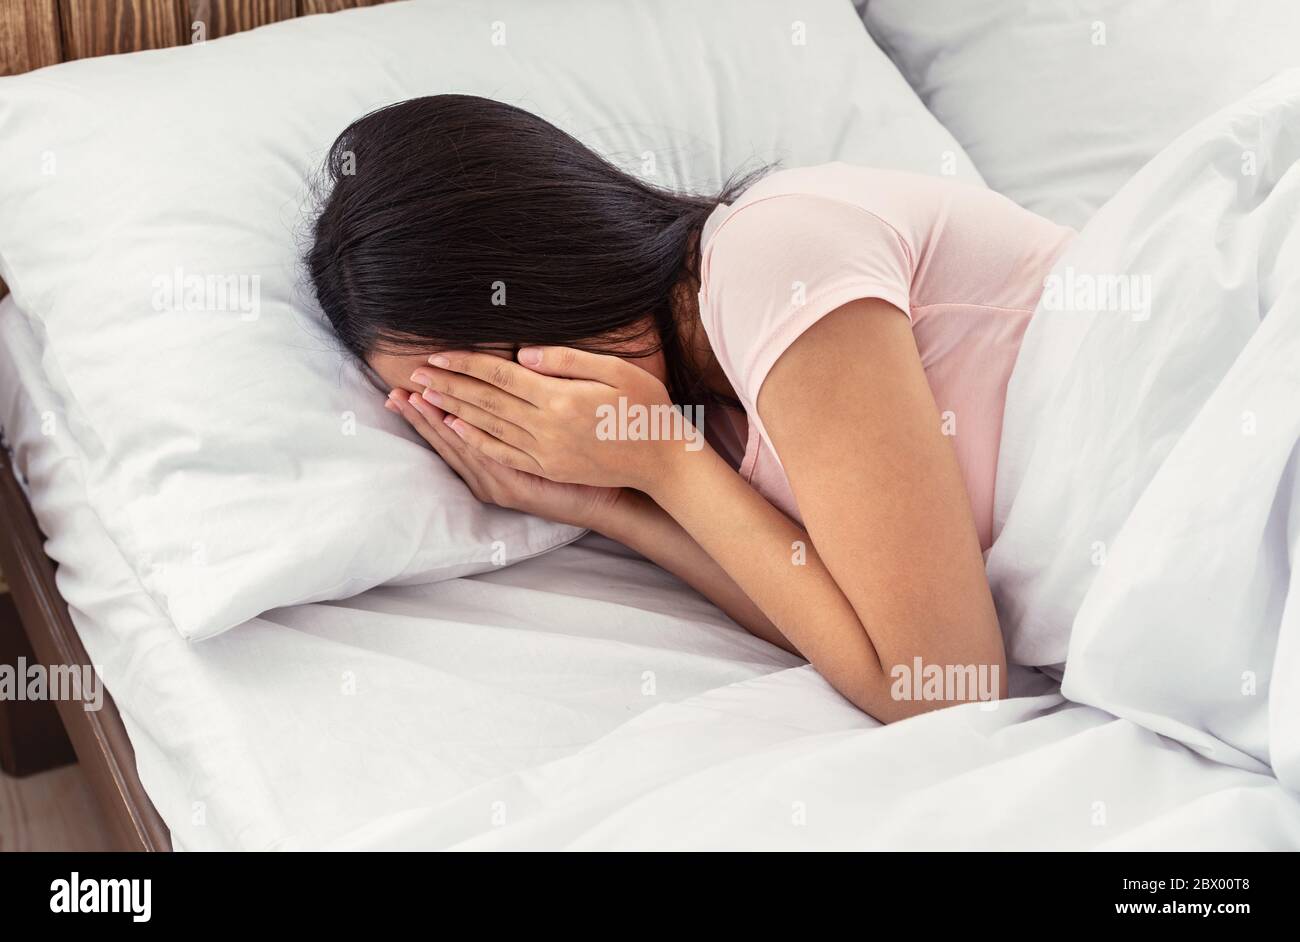 Unrecognizable Girl Crying Covering Face With Hands Lying In Bed Stock Photo